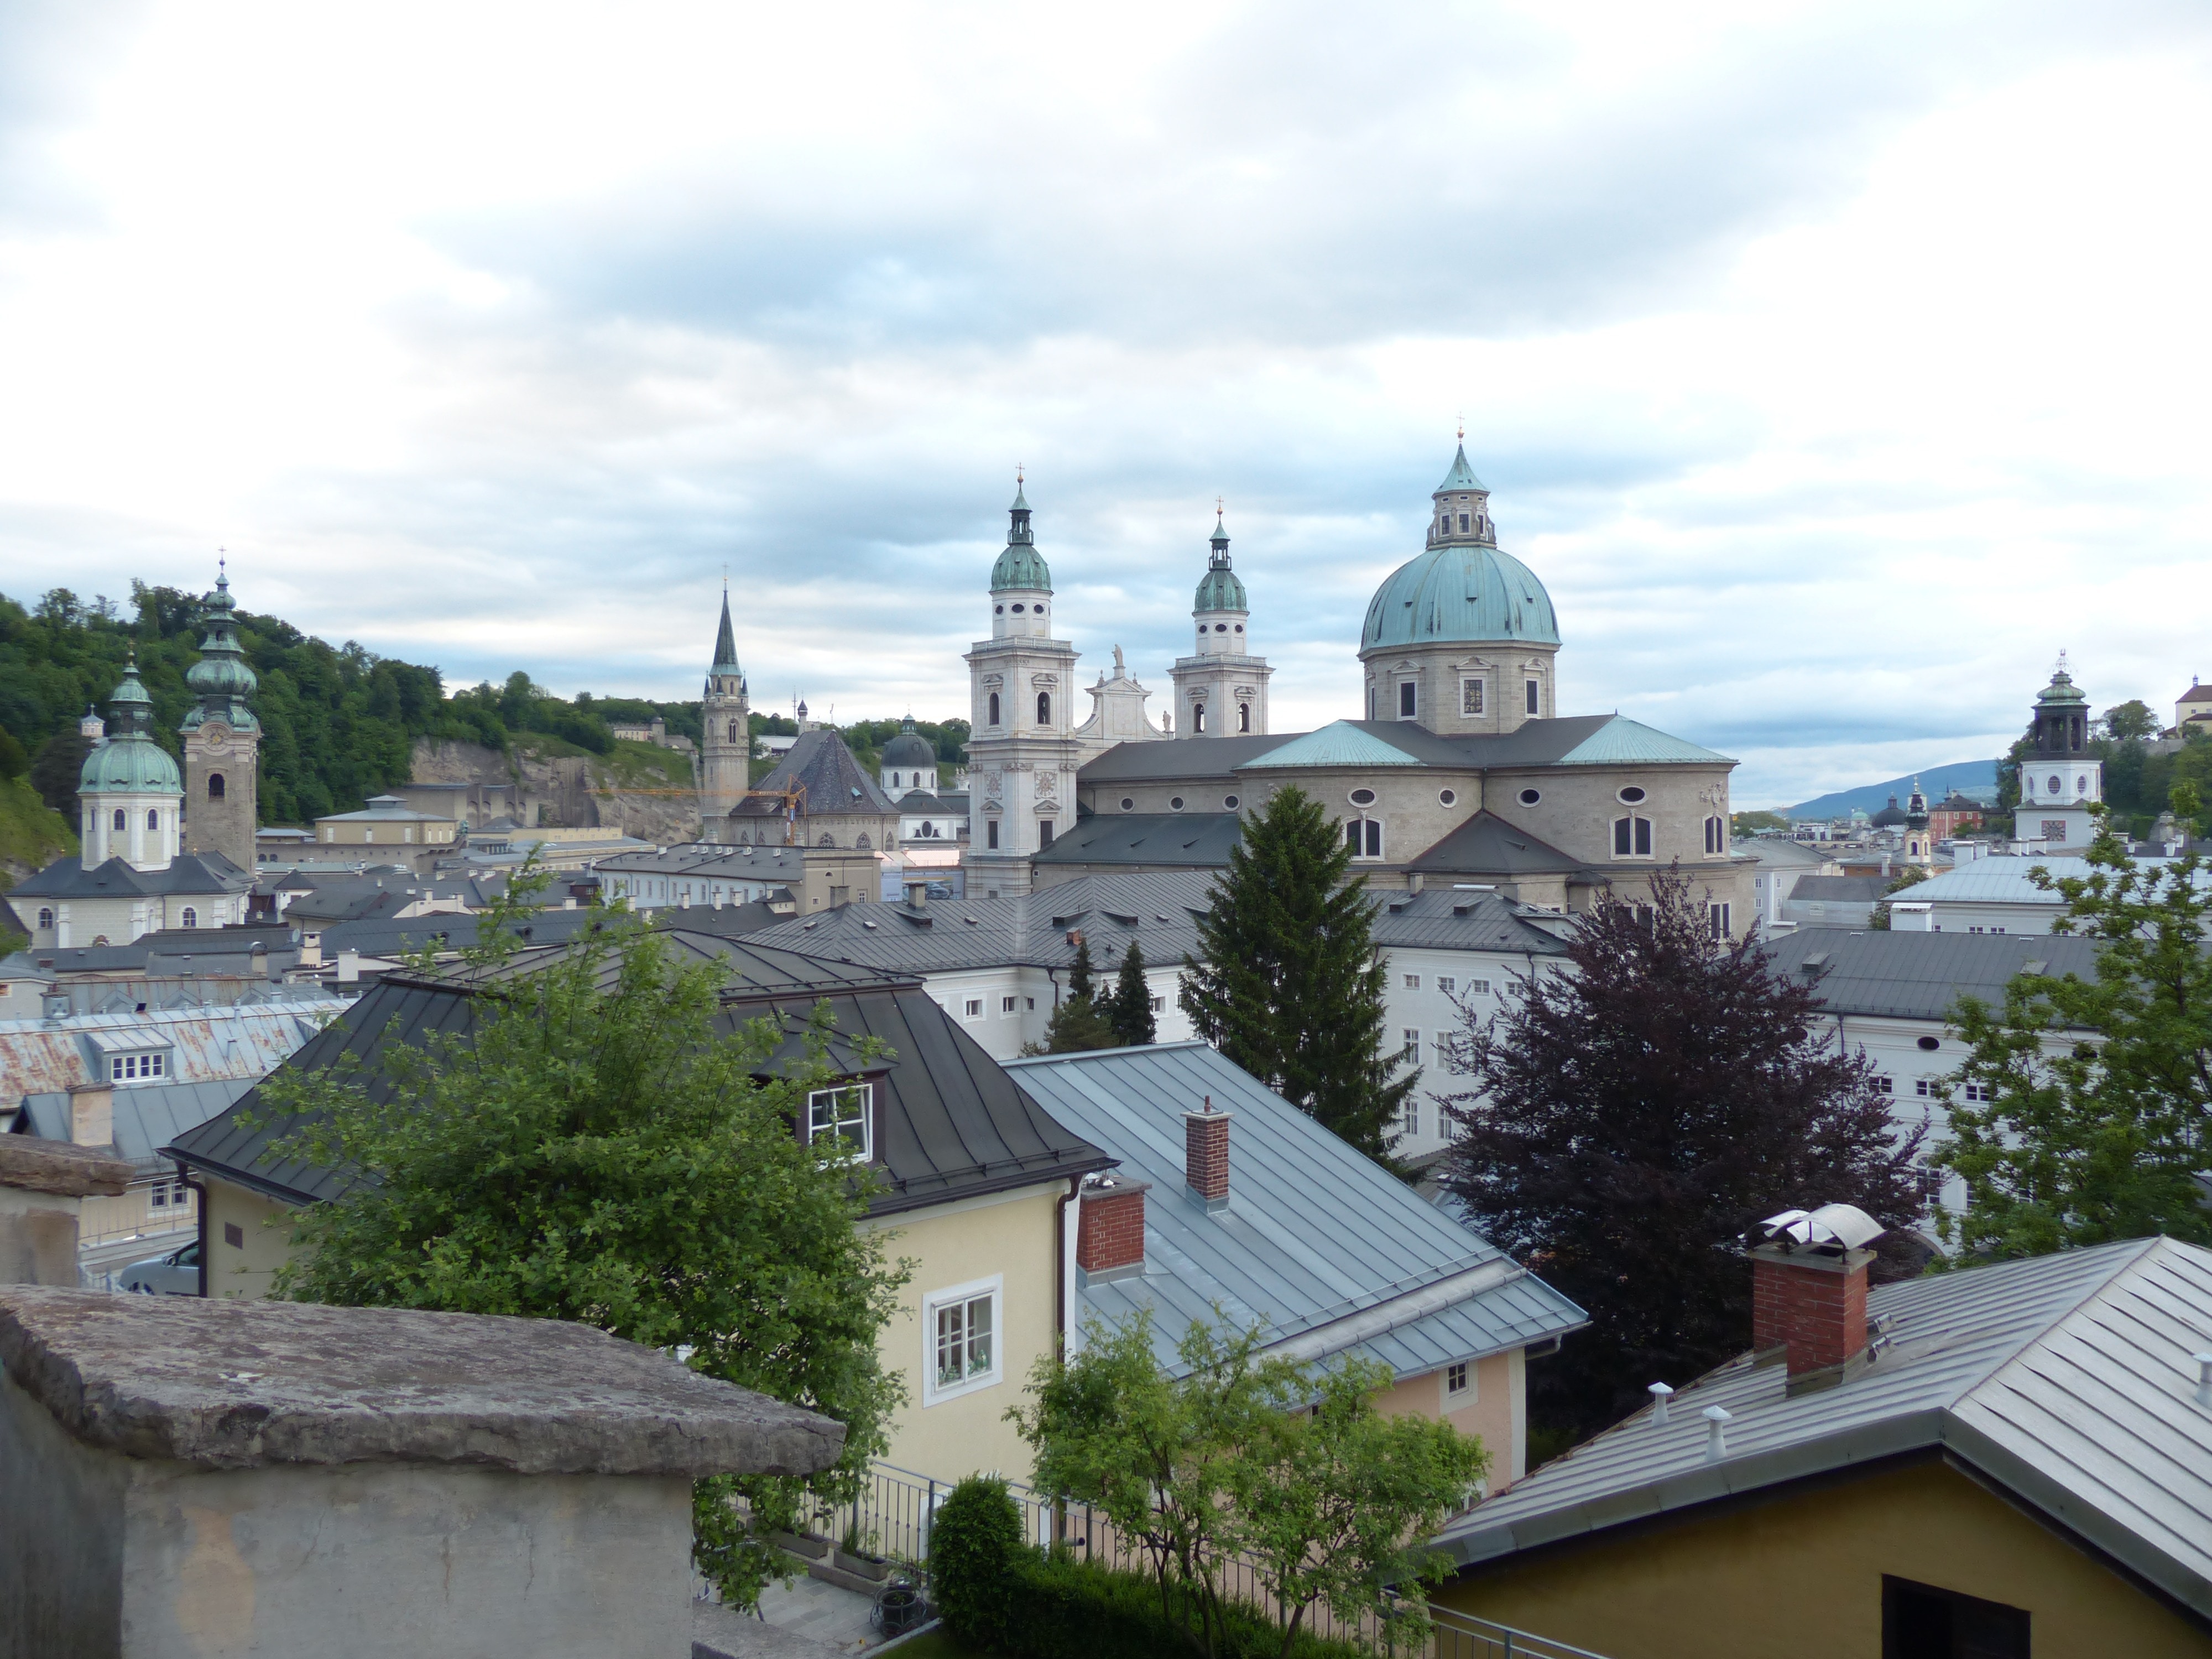 Dom, Salzburg Cathedral, Cathedral, architecture, building exterior